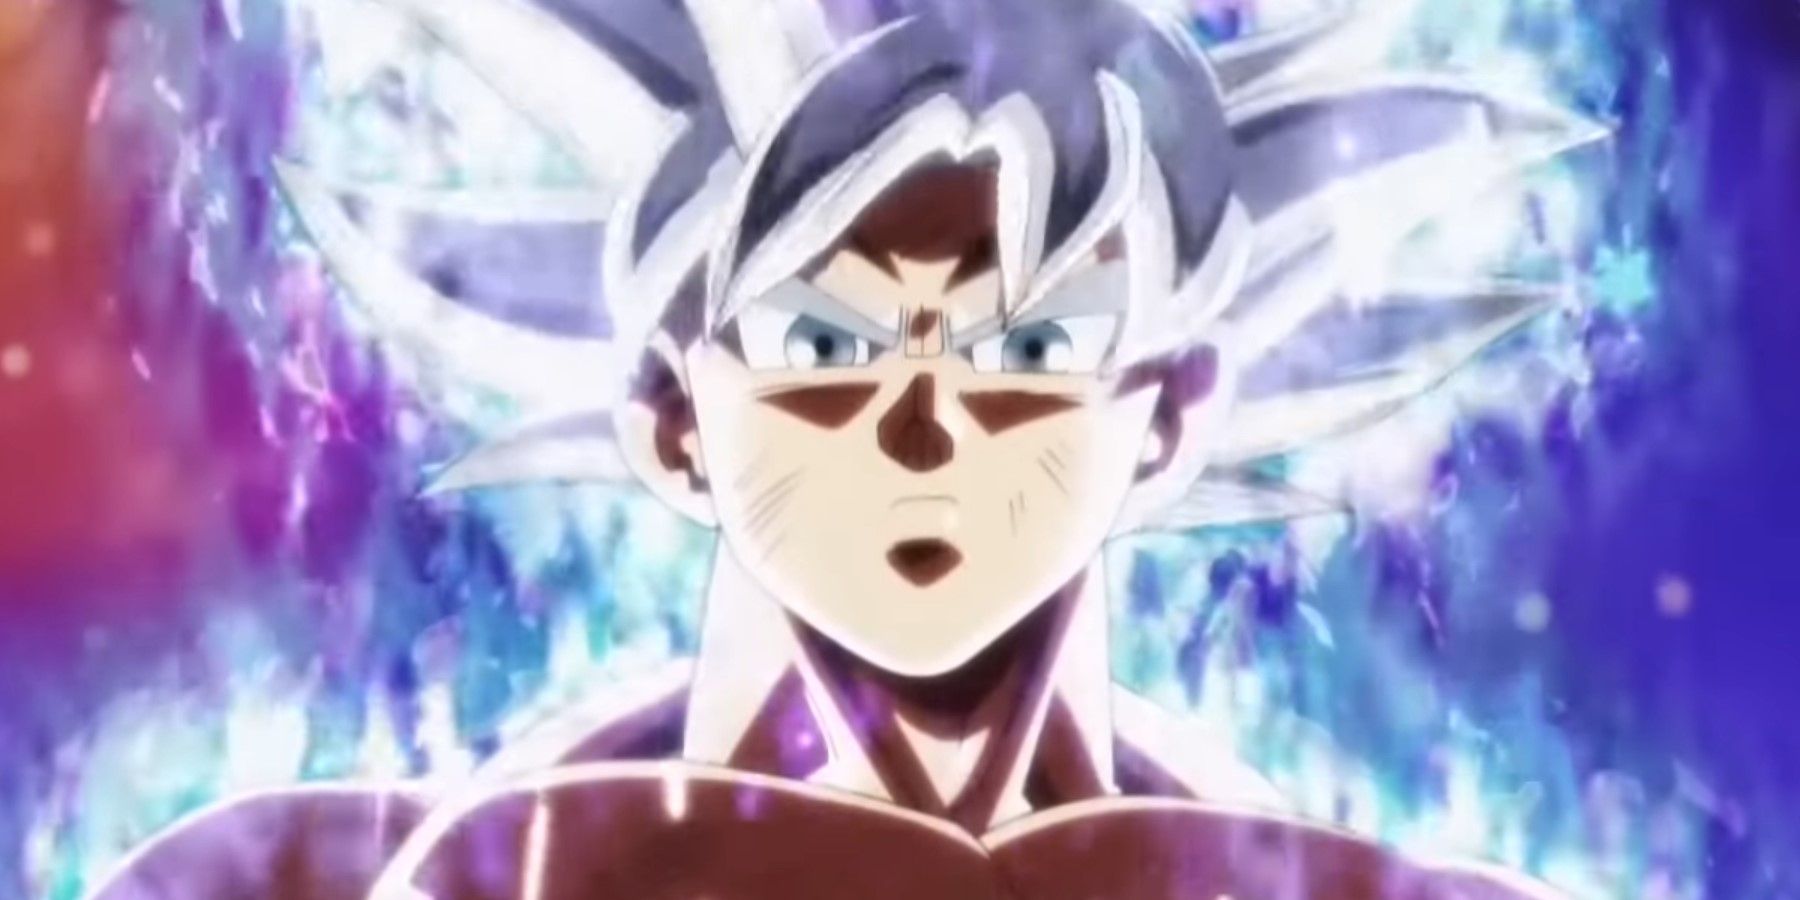 Ultra Instinct Training in Real Life – Be a Game Character